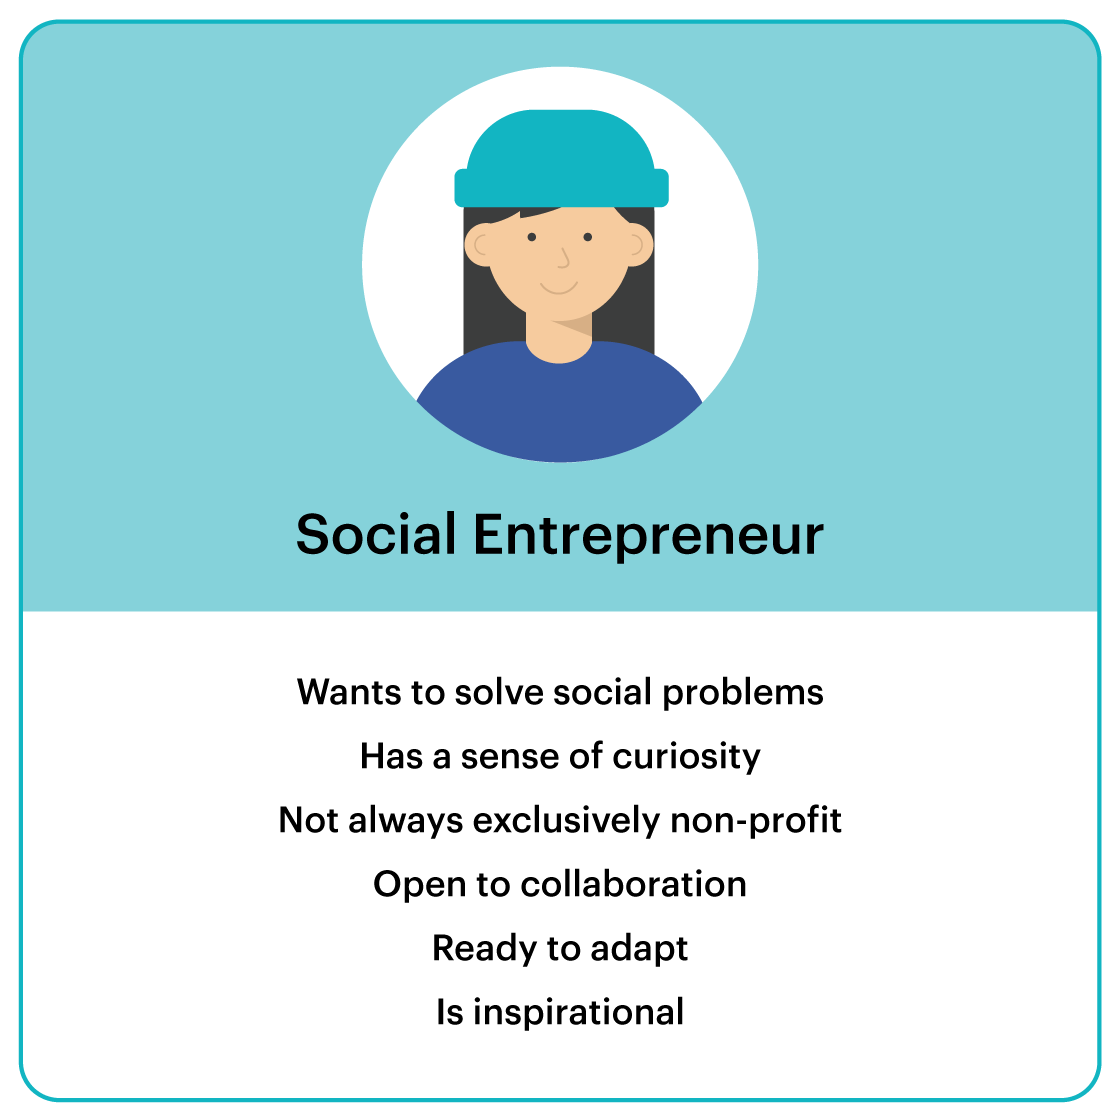 Infographic depicting an illustration of a social entrepreneur and 6 common characteristics